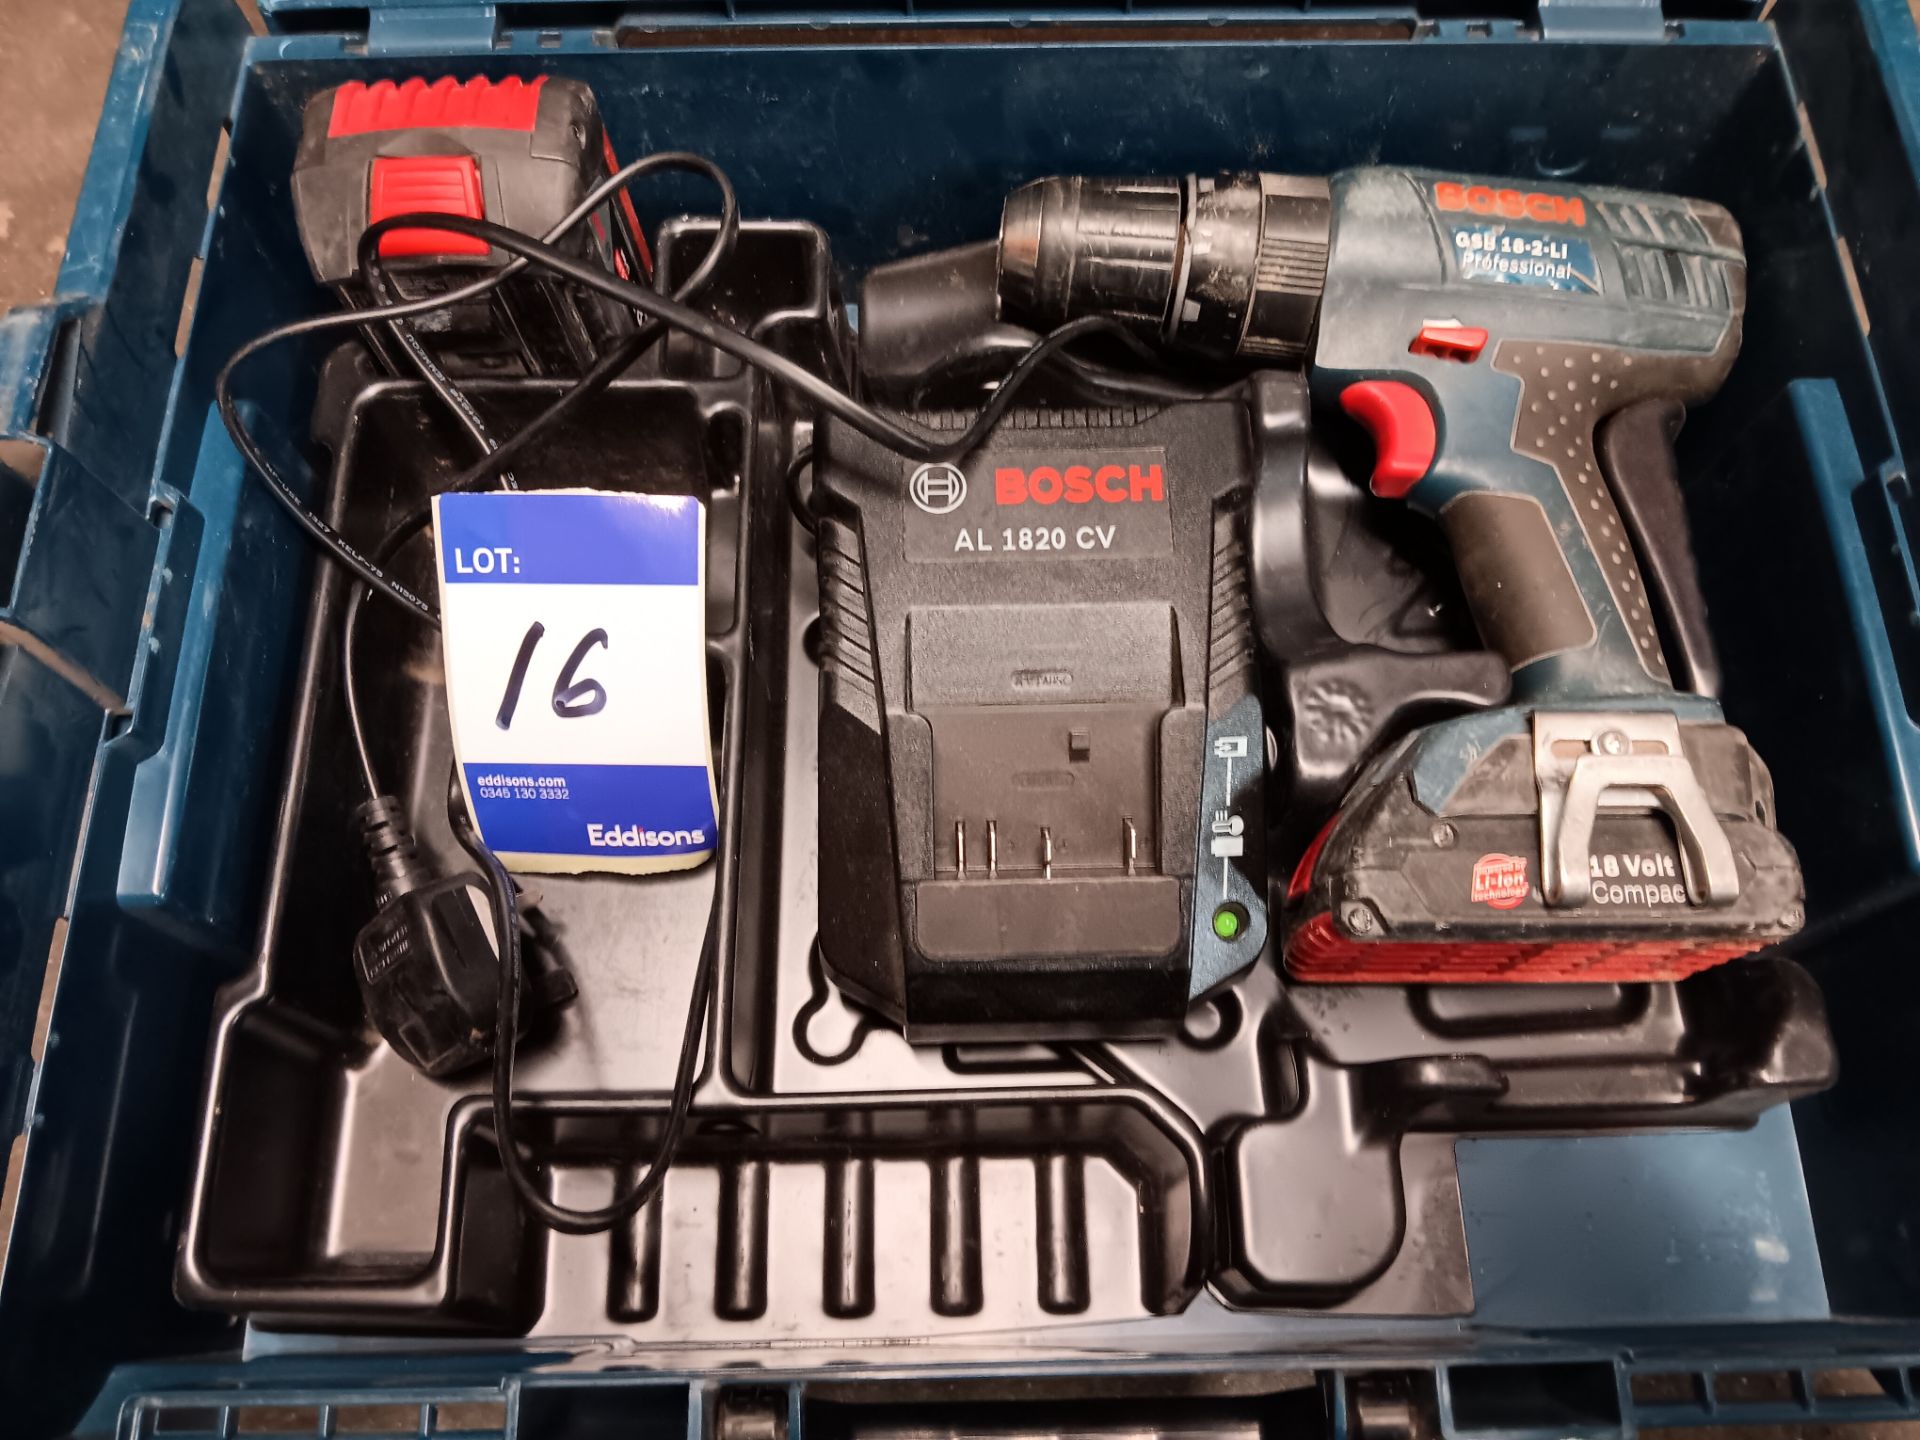 Bosch GSB 18-2-Li Drill with 2 x Batteries & Charger